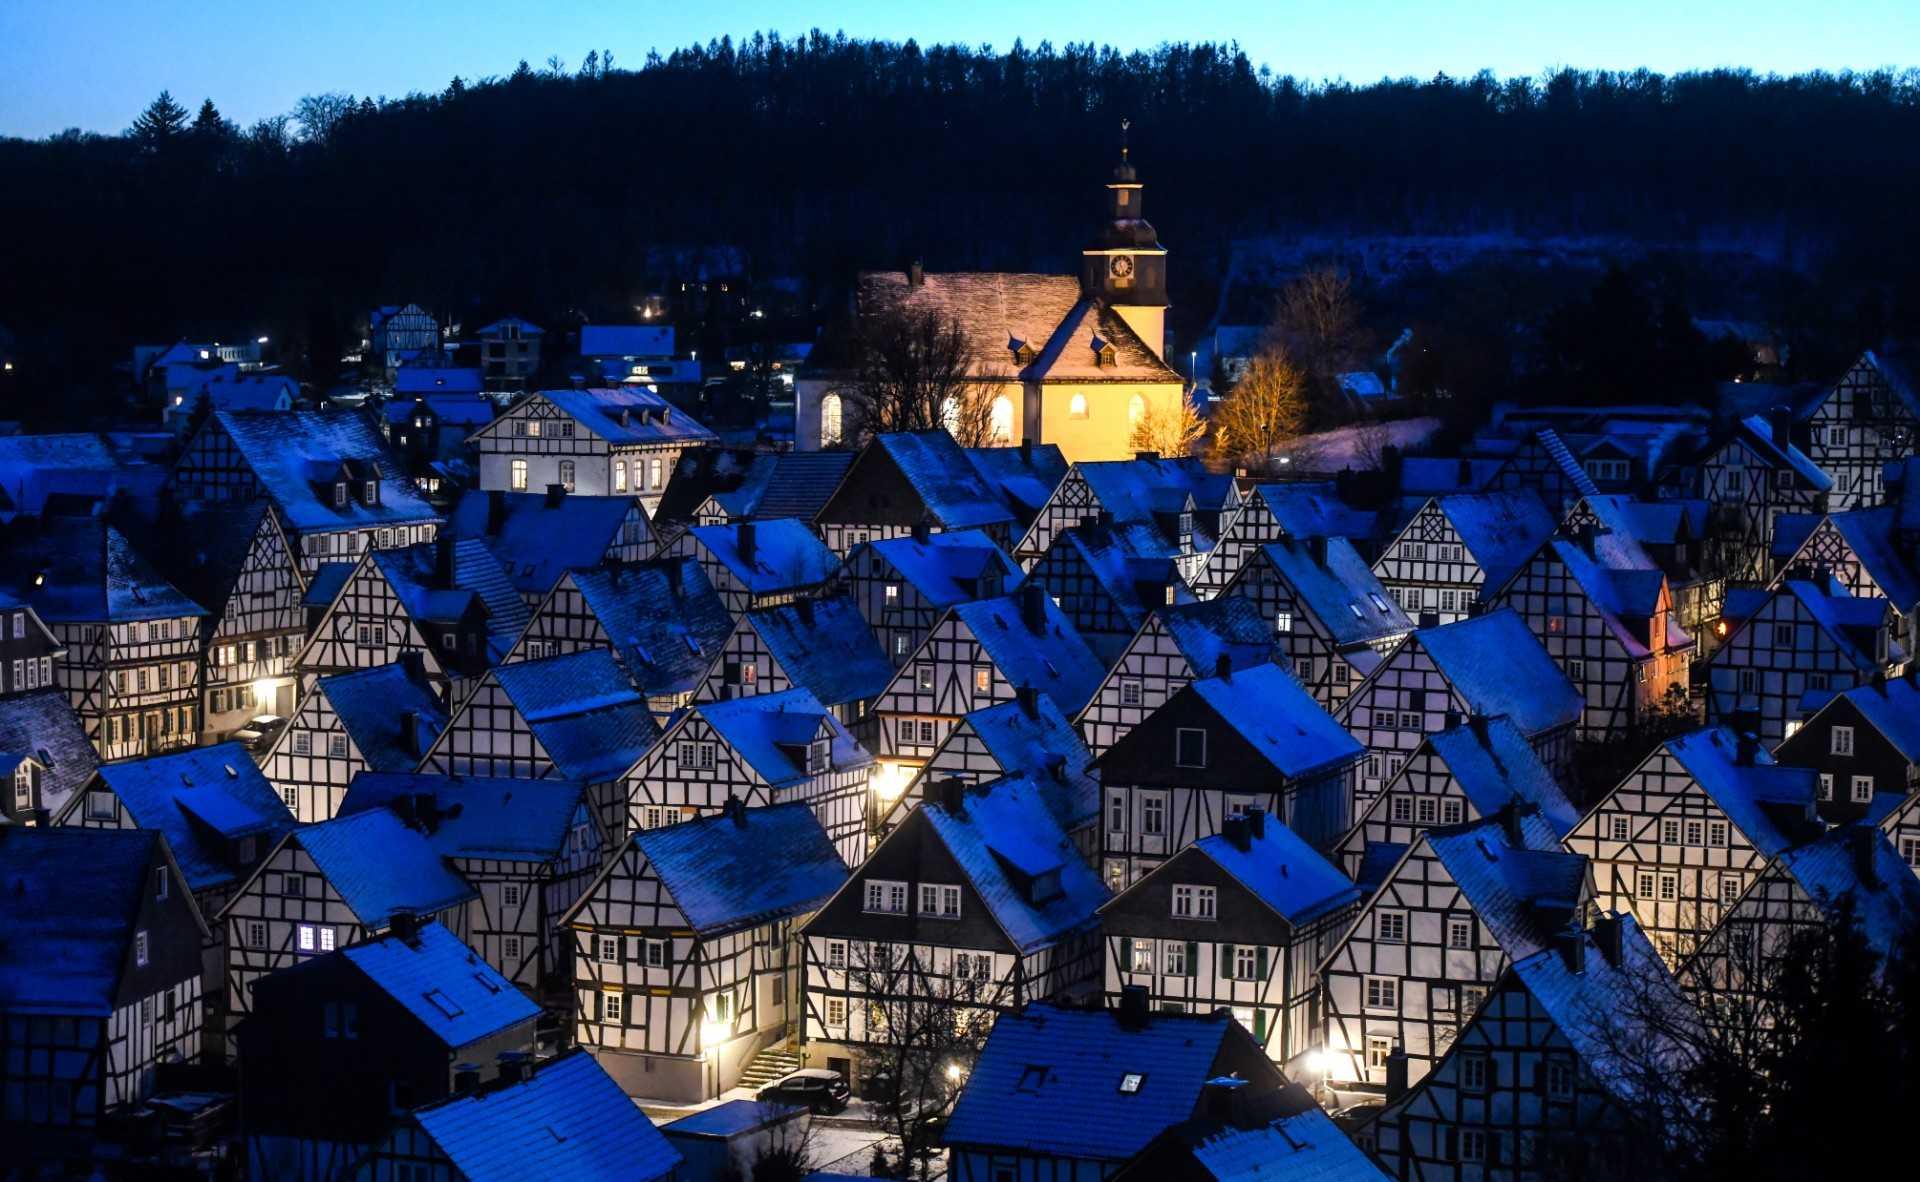 A view shows 80 half-timbered houses in the old town of Freudenberg, western Germany on Feb 13, 2021. Photo: AFP
